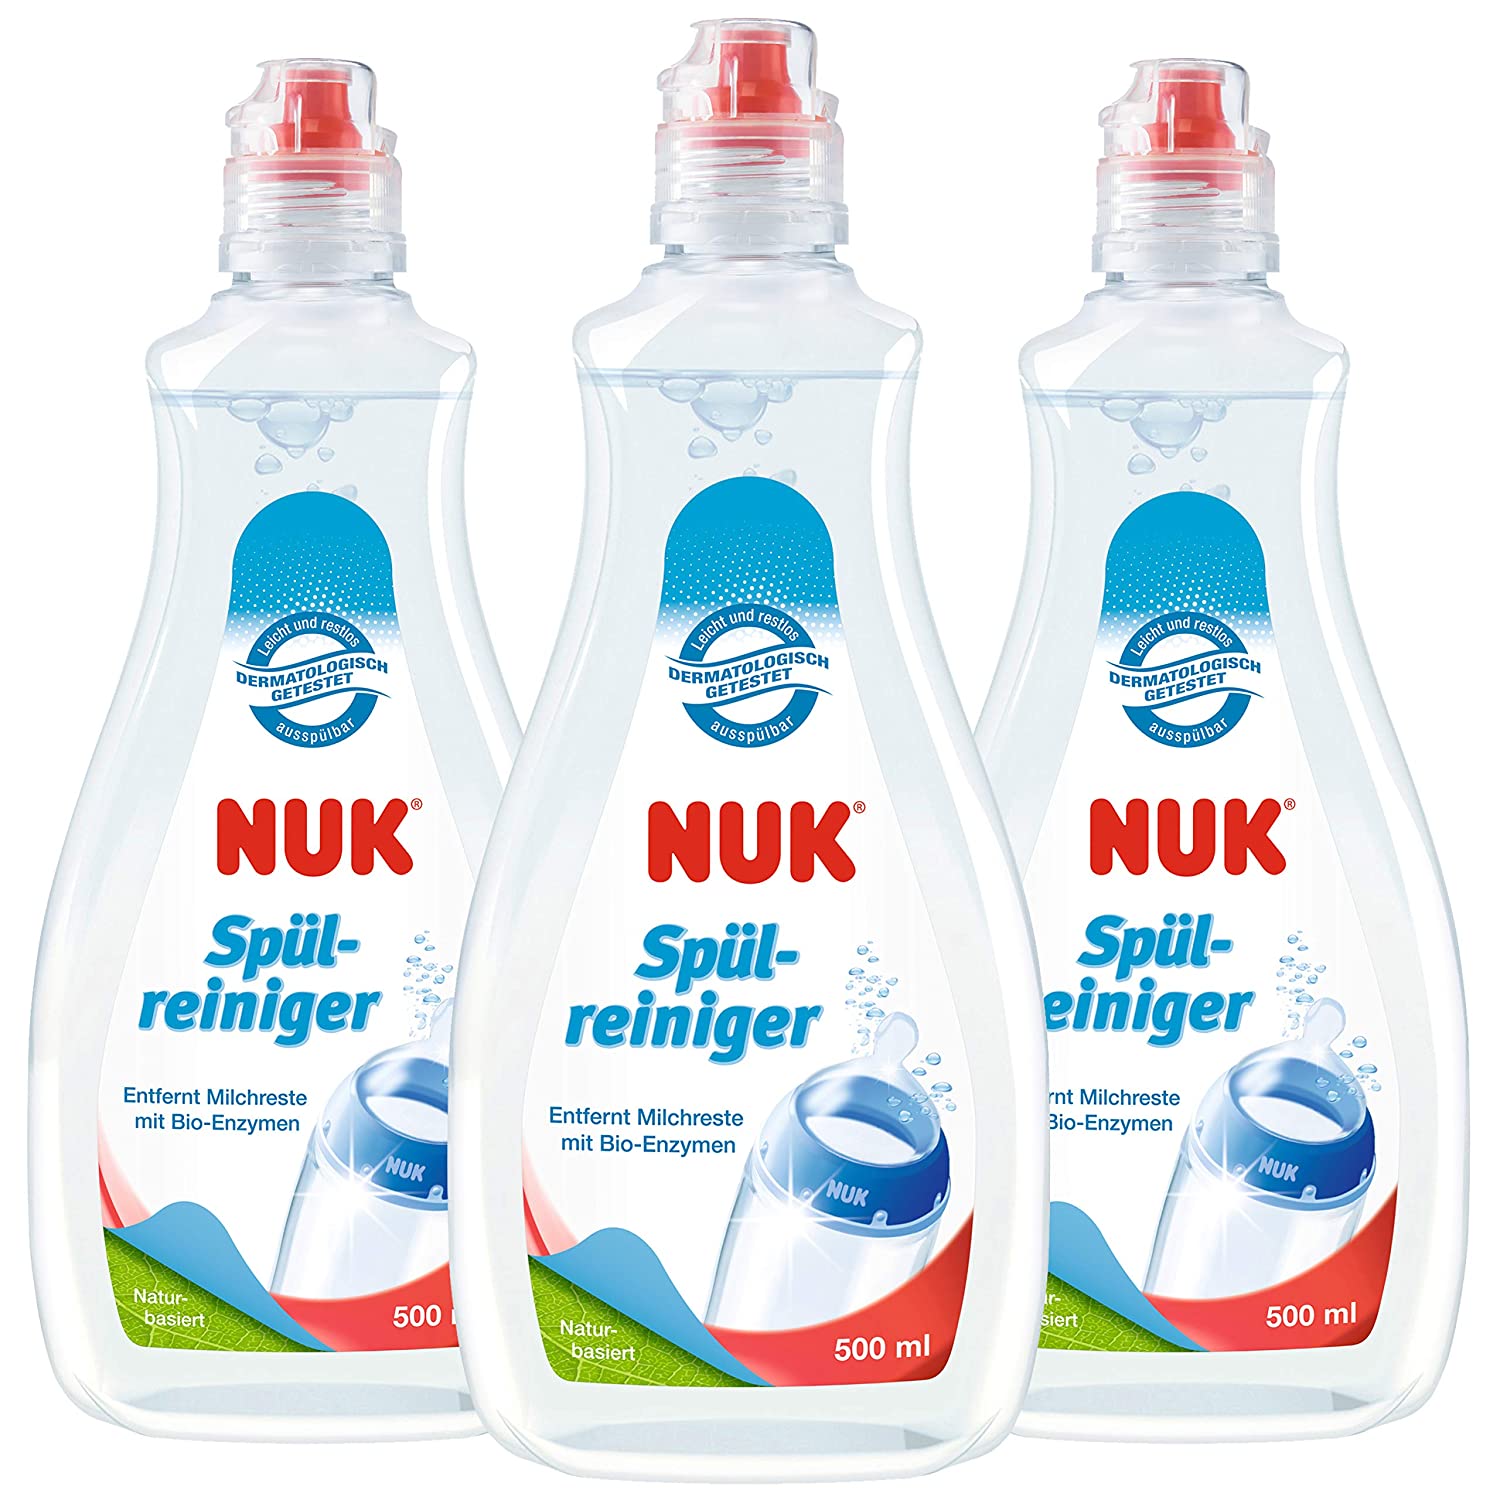 Nuk dish washing liquid for baby bottles, ideal for cleaning baby bottles, teats and accessories, fragrance-free, pH neutral, pack of 3